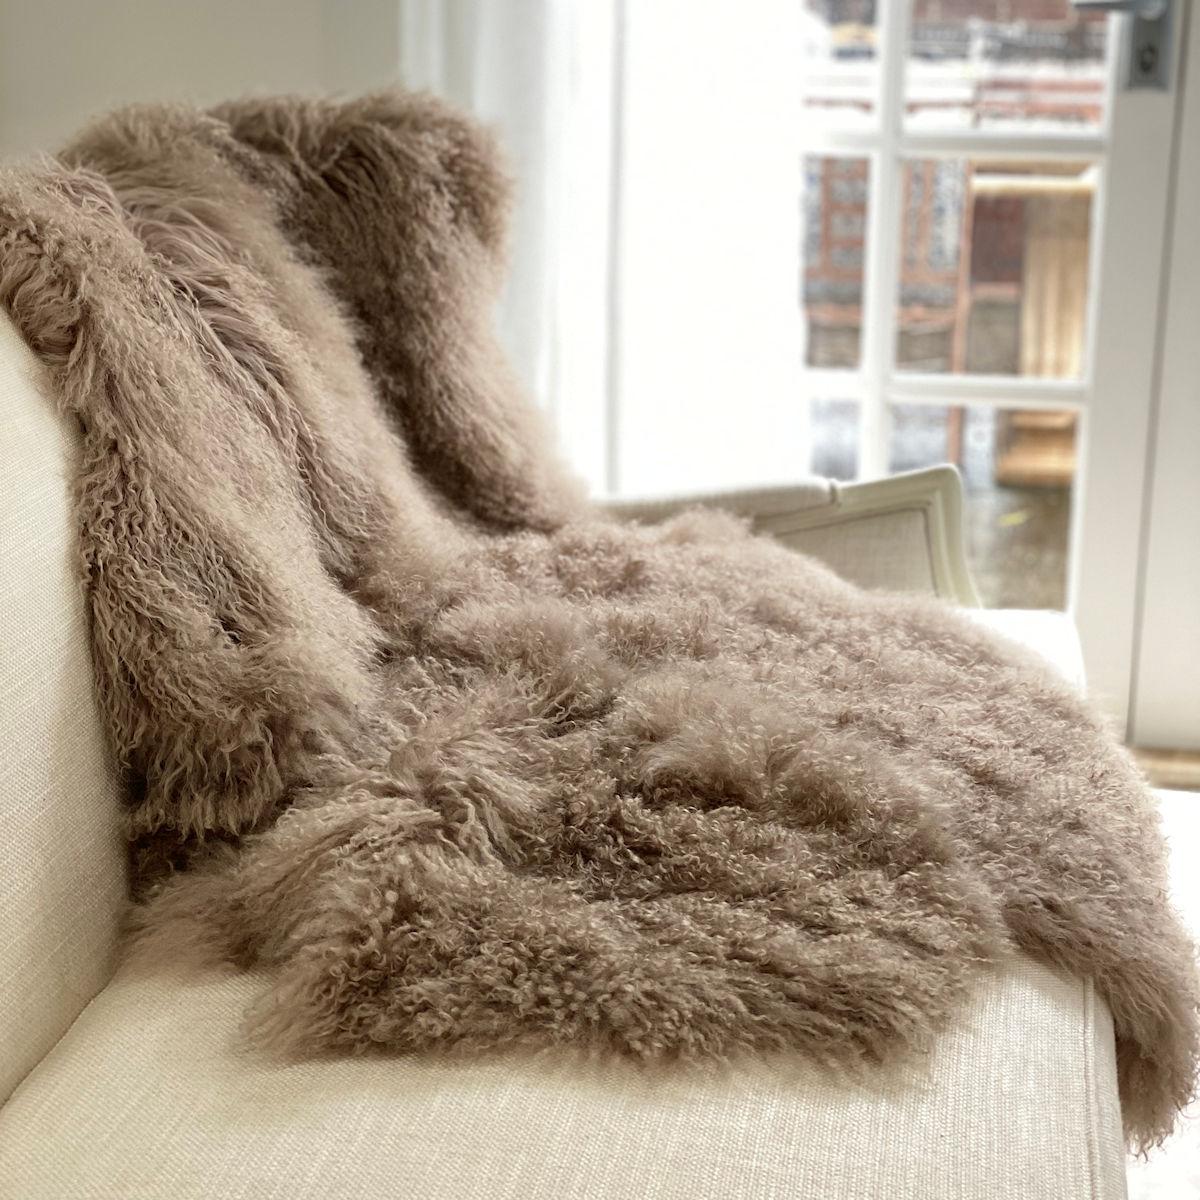 Elevate the luxury of your decor with this Mongolian Fur Throw rug. Whether styling a sofa or adding glamour to a bedroom, this exquisite fur throw will uplift the elegance and ambiance giving you the versatility in styling as as a fur throw or even